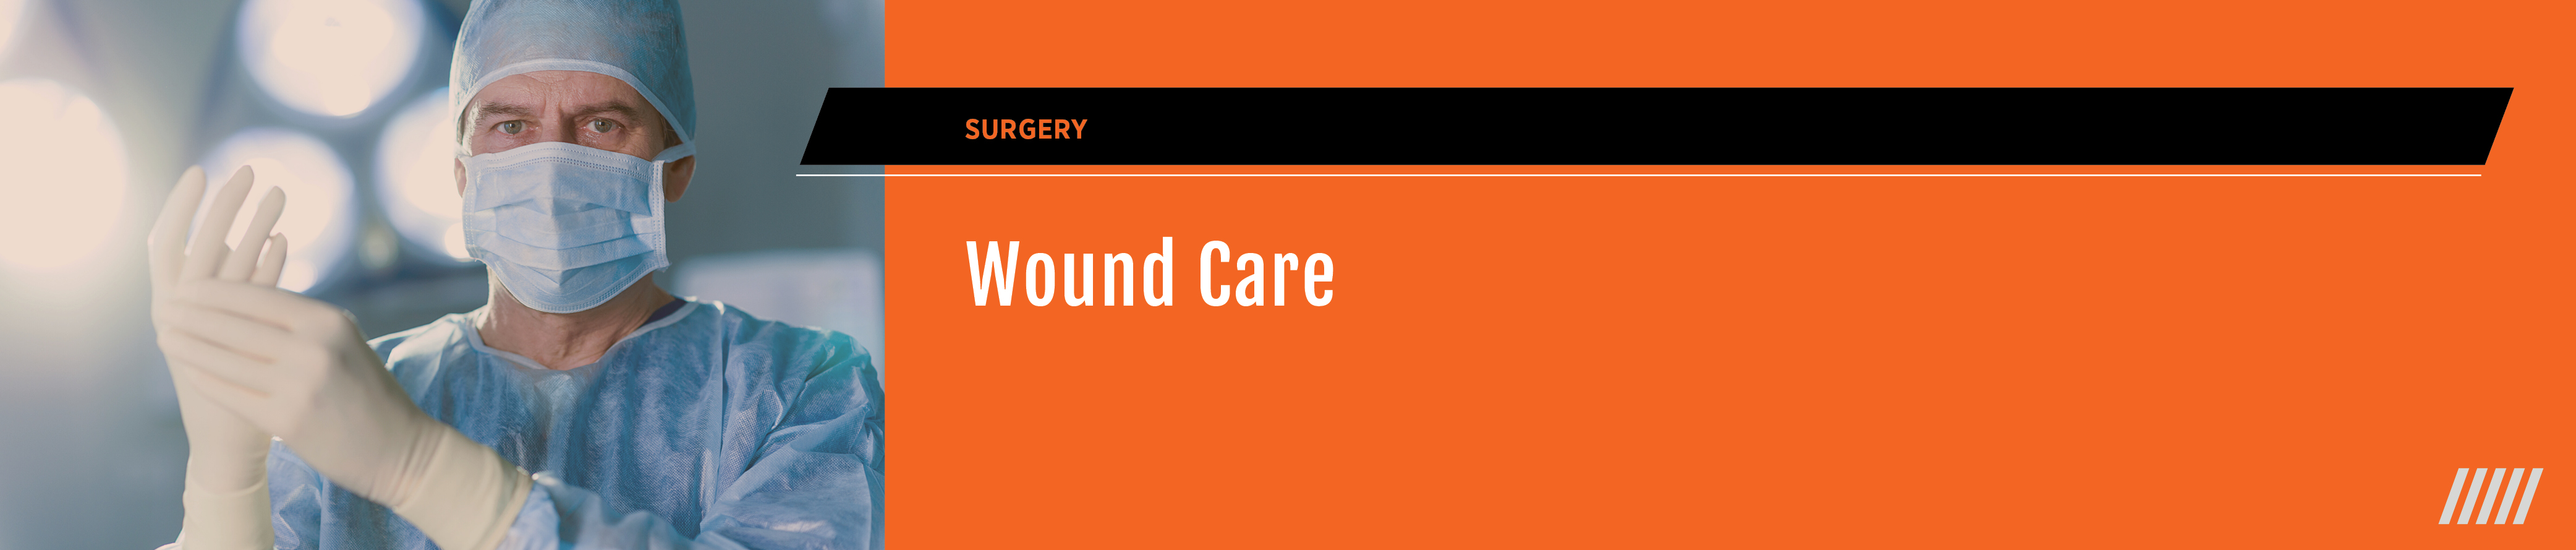 Wound Care Banner